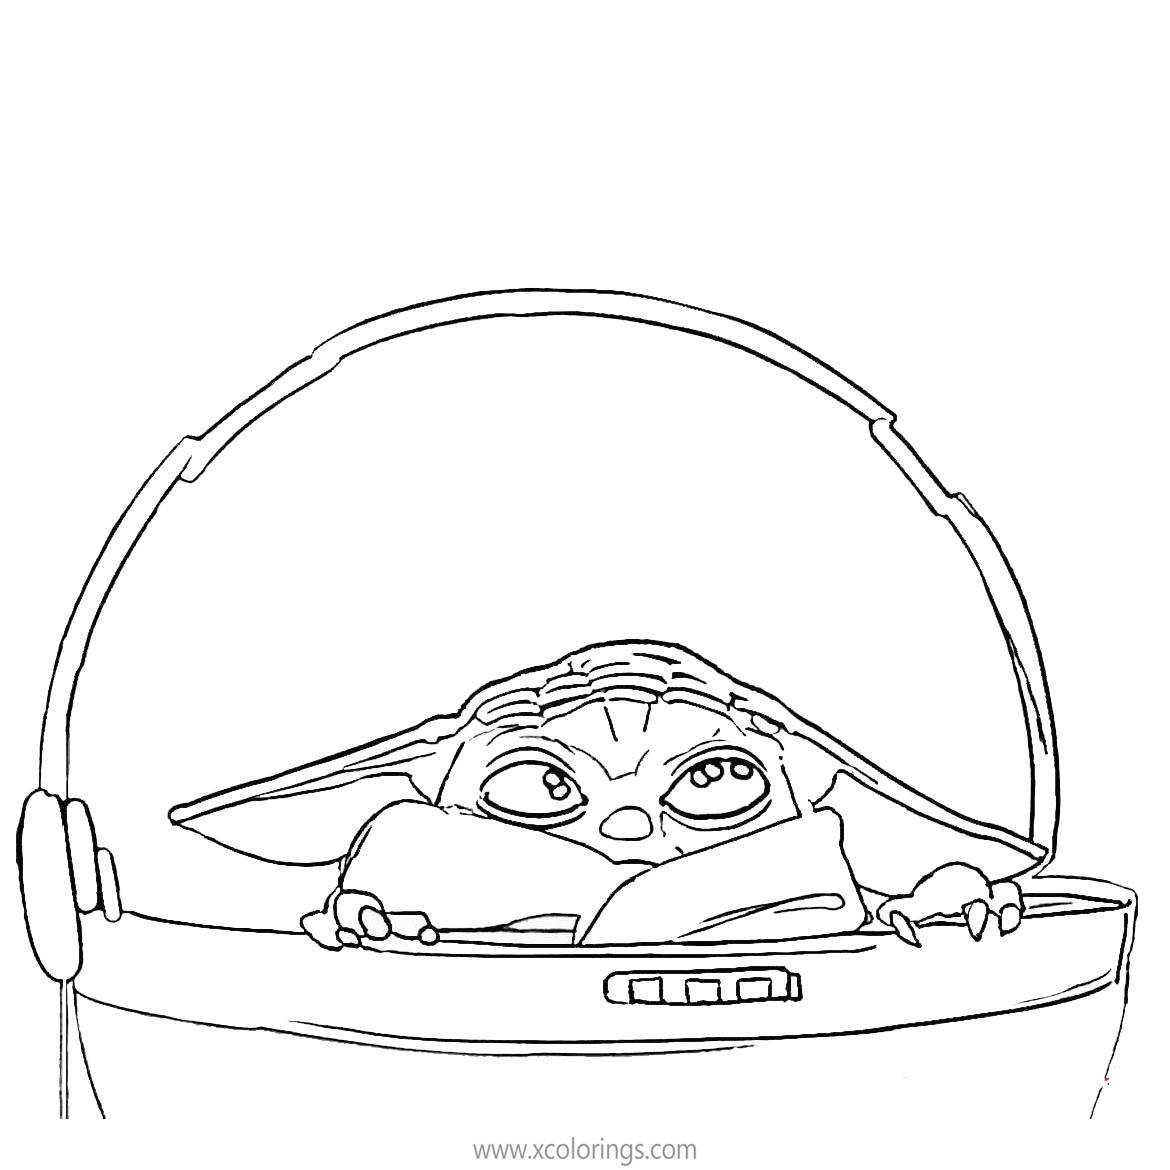 Free Baby Yoda Coloring Pages with His Shelter printable